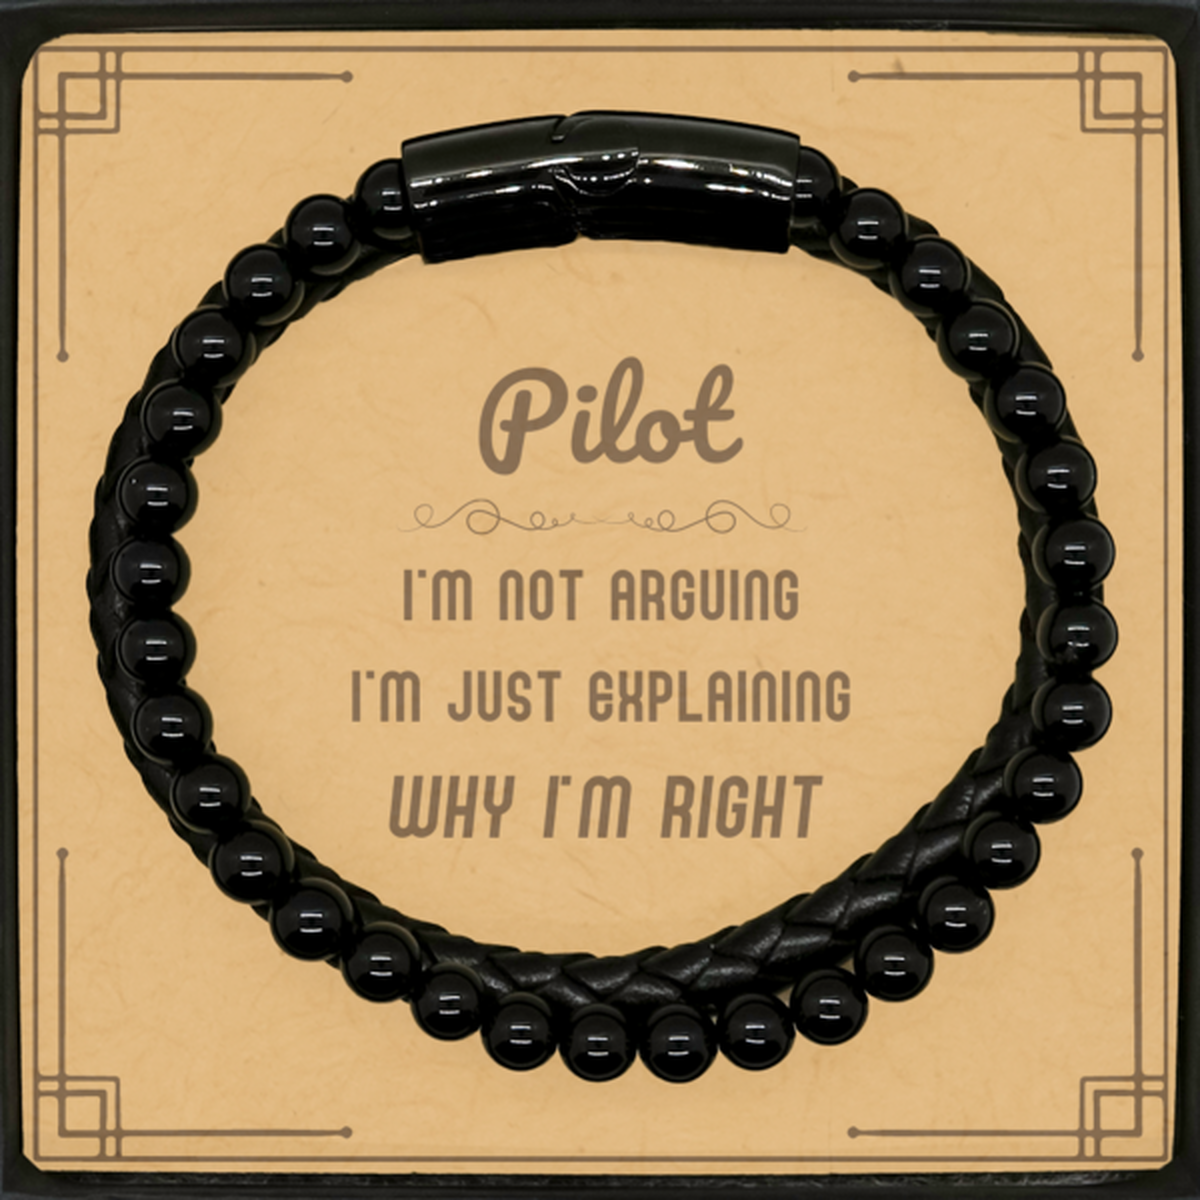 Pilot I'm not Arguing. I'm Just Explaining Why I'm RIGHT Stone Leather Bracelets, Funny Saying Quote Pilot Gifts For Pilot Message Card Graduation Birthday Christmas Gifts for Men Women Coworker